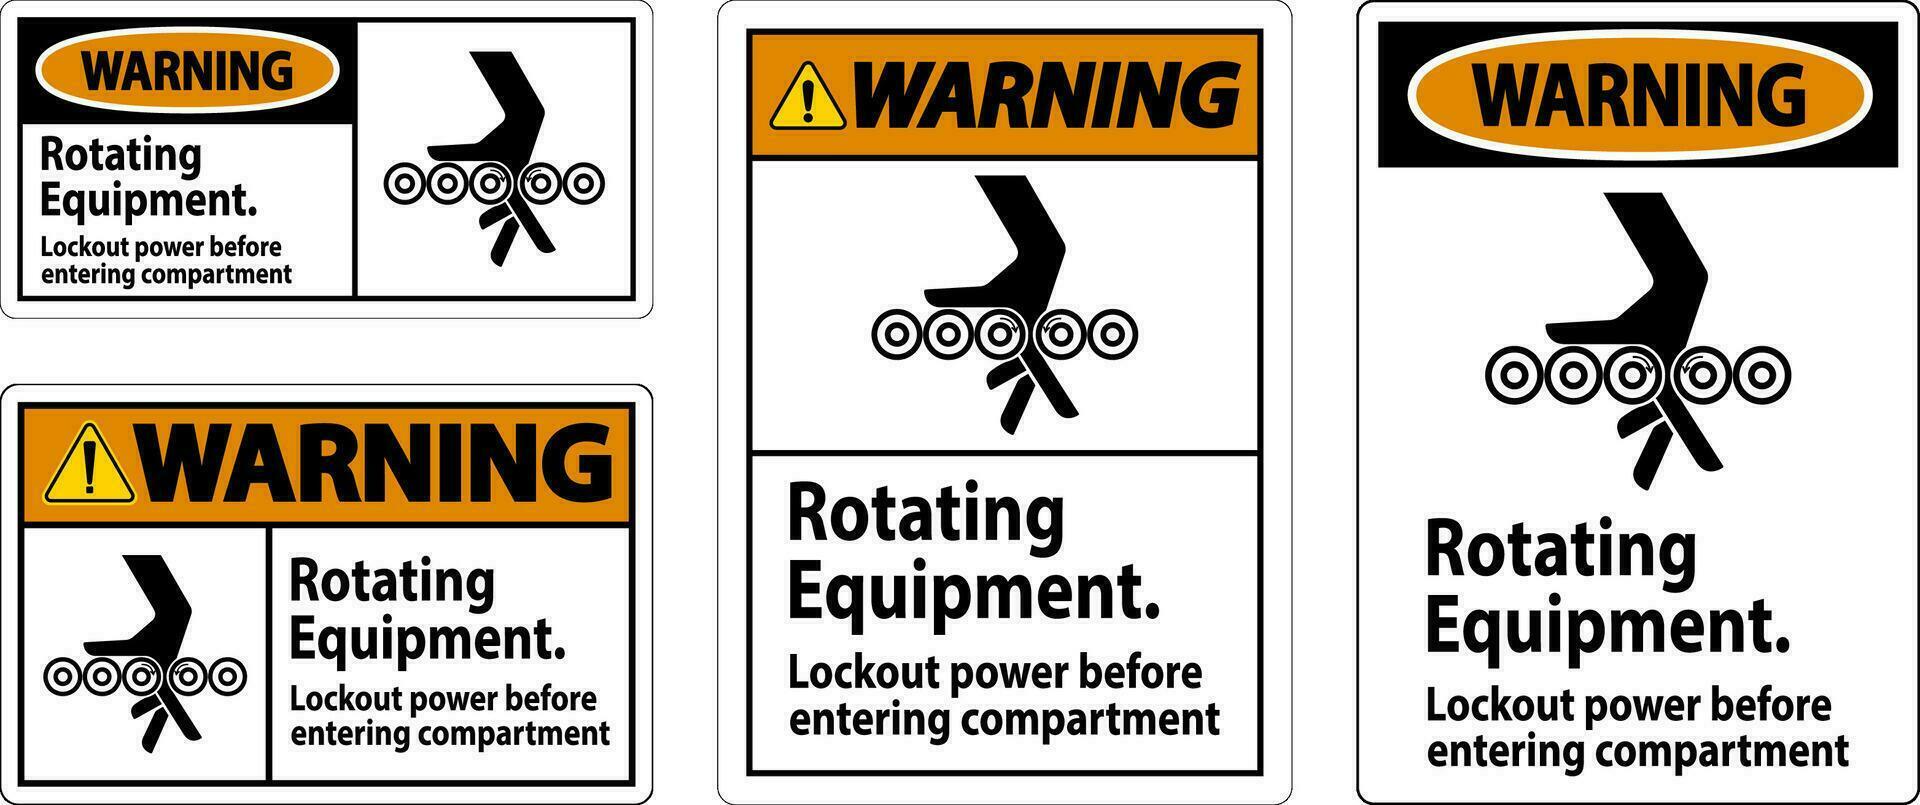 Warning Sign, Rotating Equipment, Lockout Power Before Entering Compartment vector